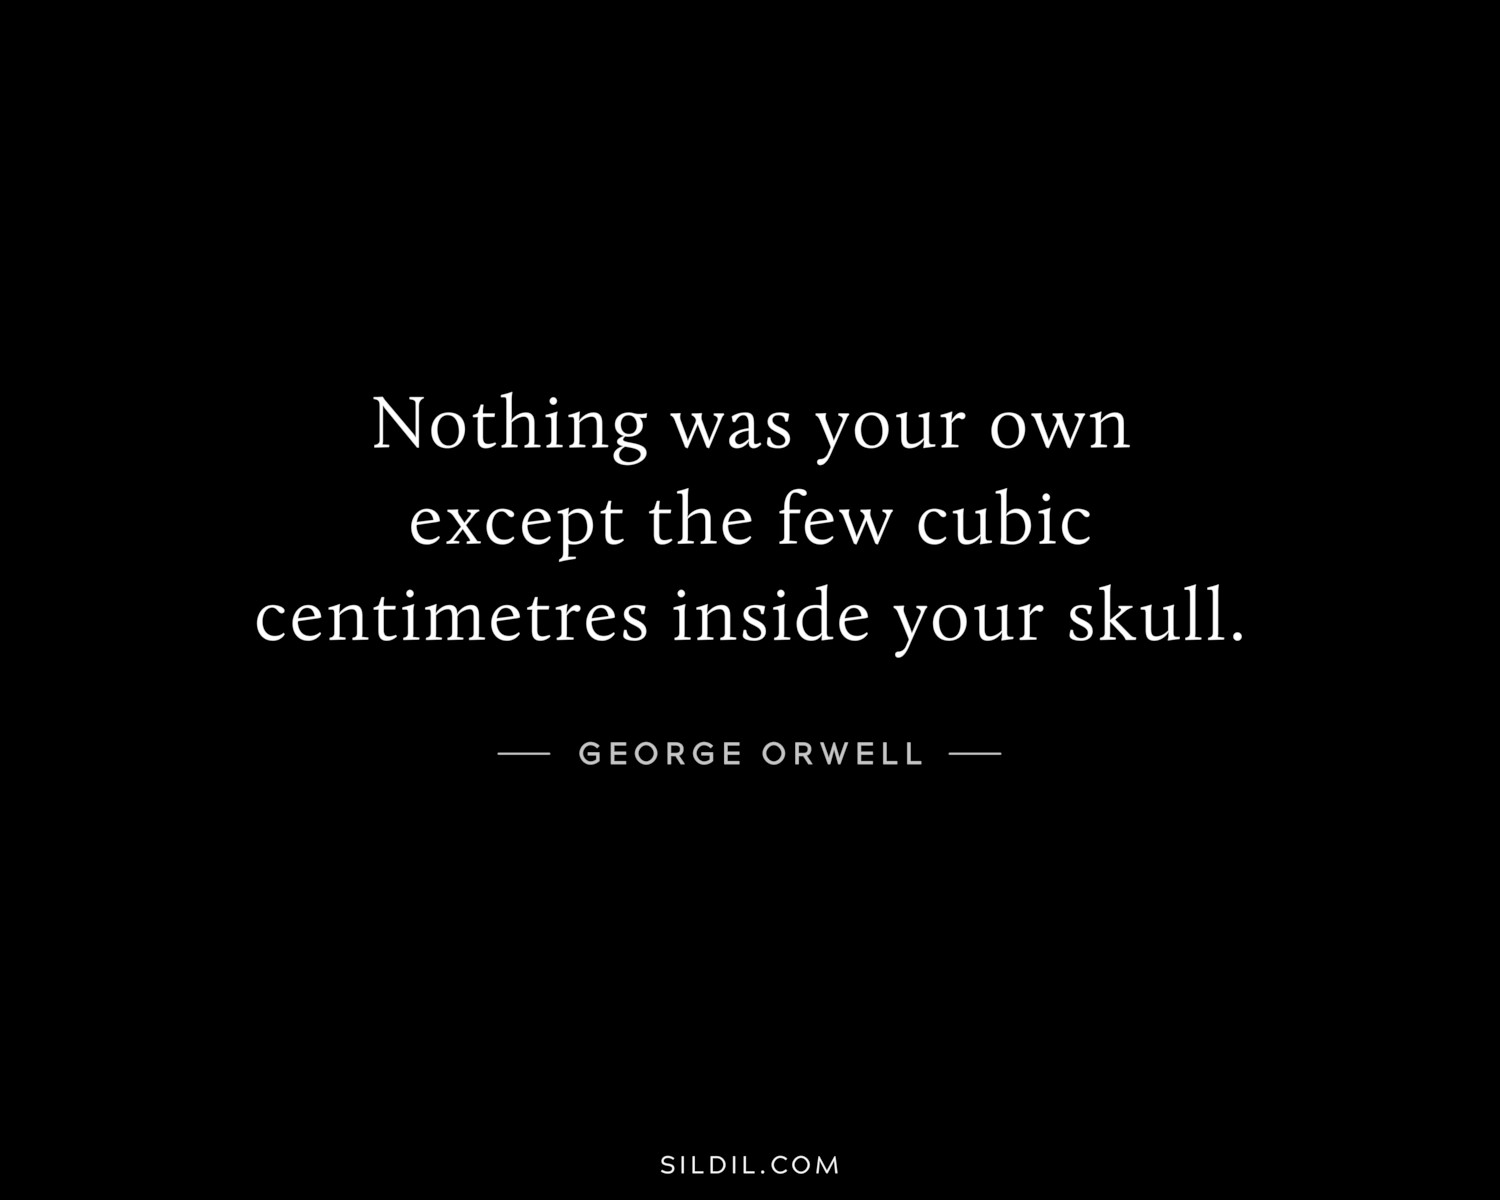 Nothing was your own except the few cubic centimetres inside your skull.